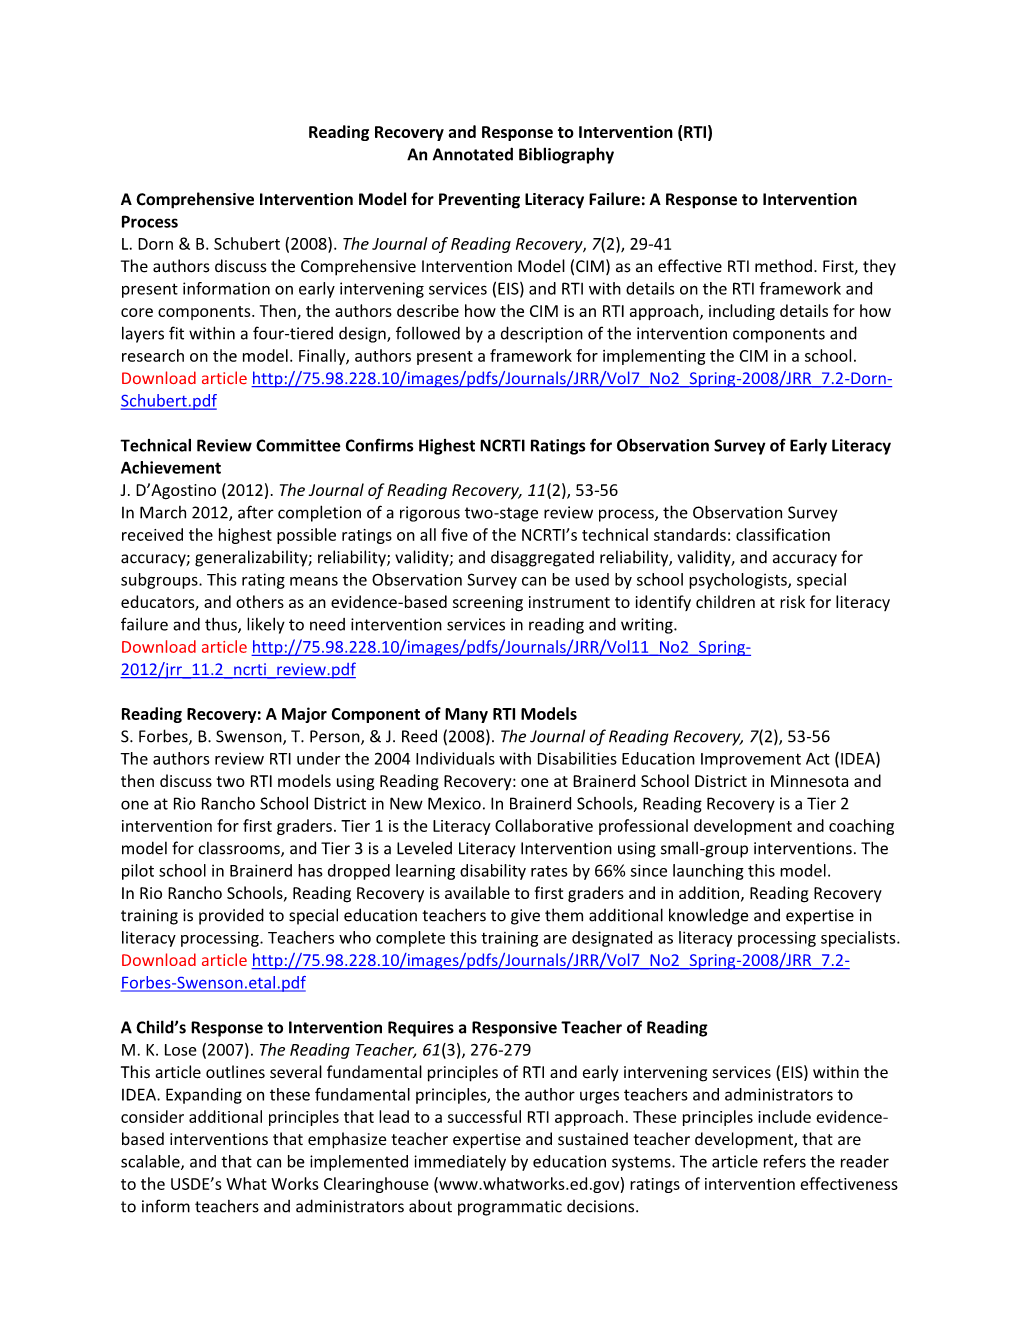 Reading Recovery and Response to Intervention (RTI) an Annotated Bibliography